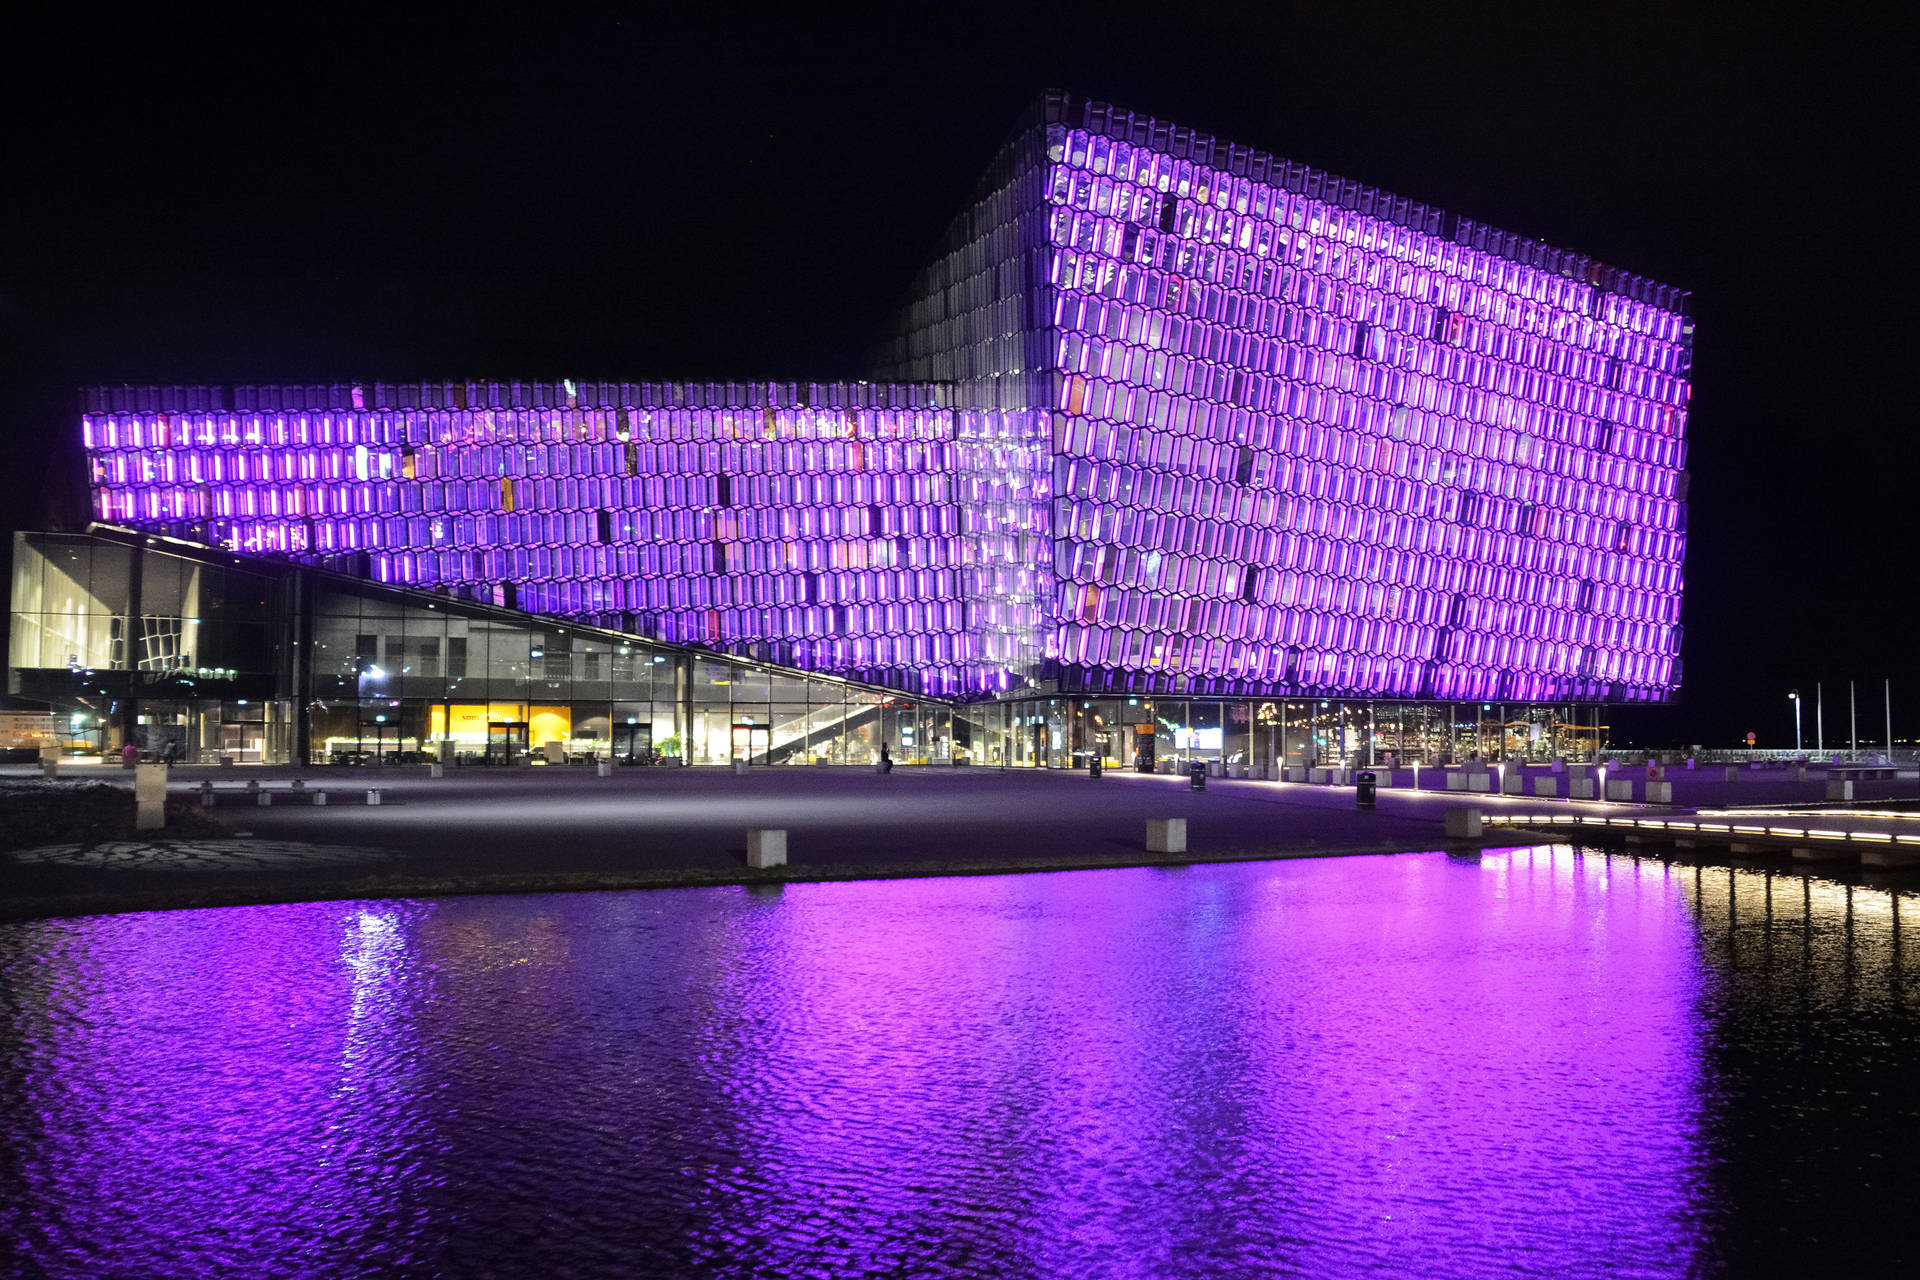 Building With Light Purple Lights By The Water